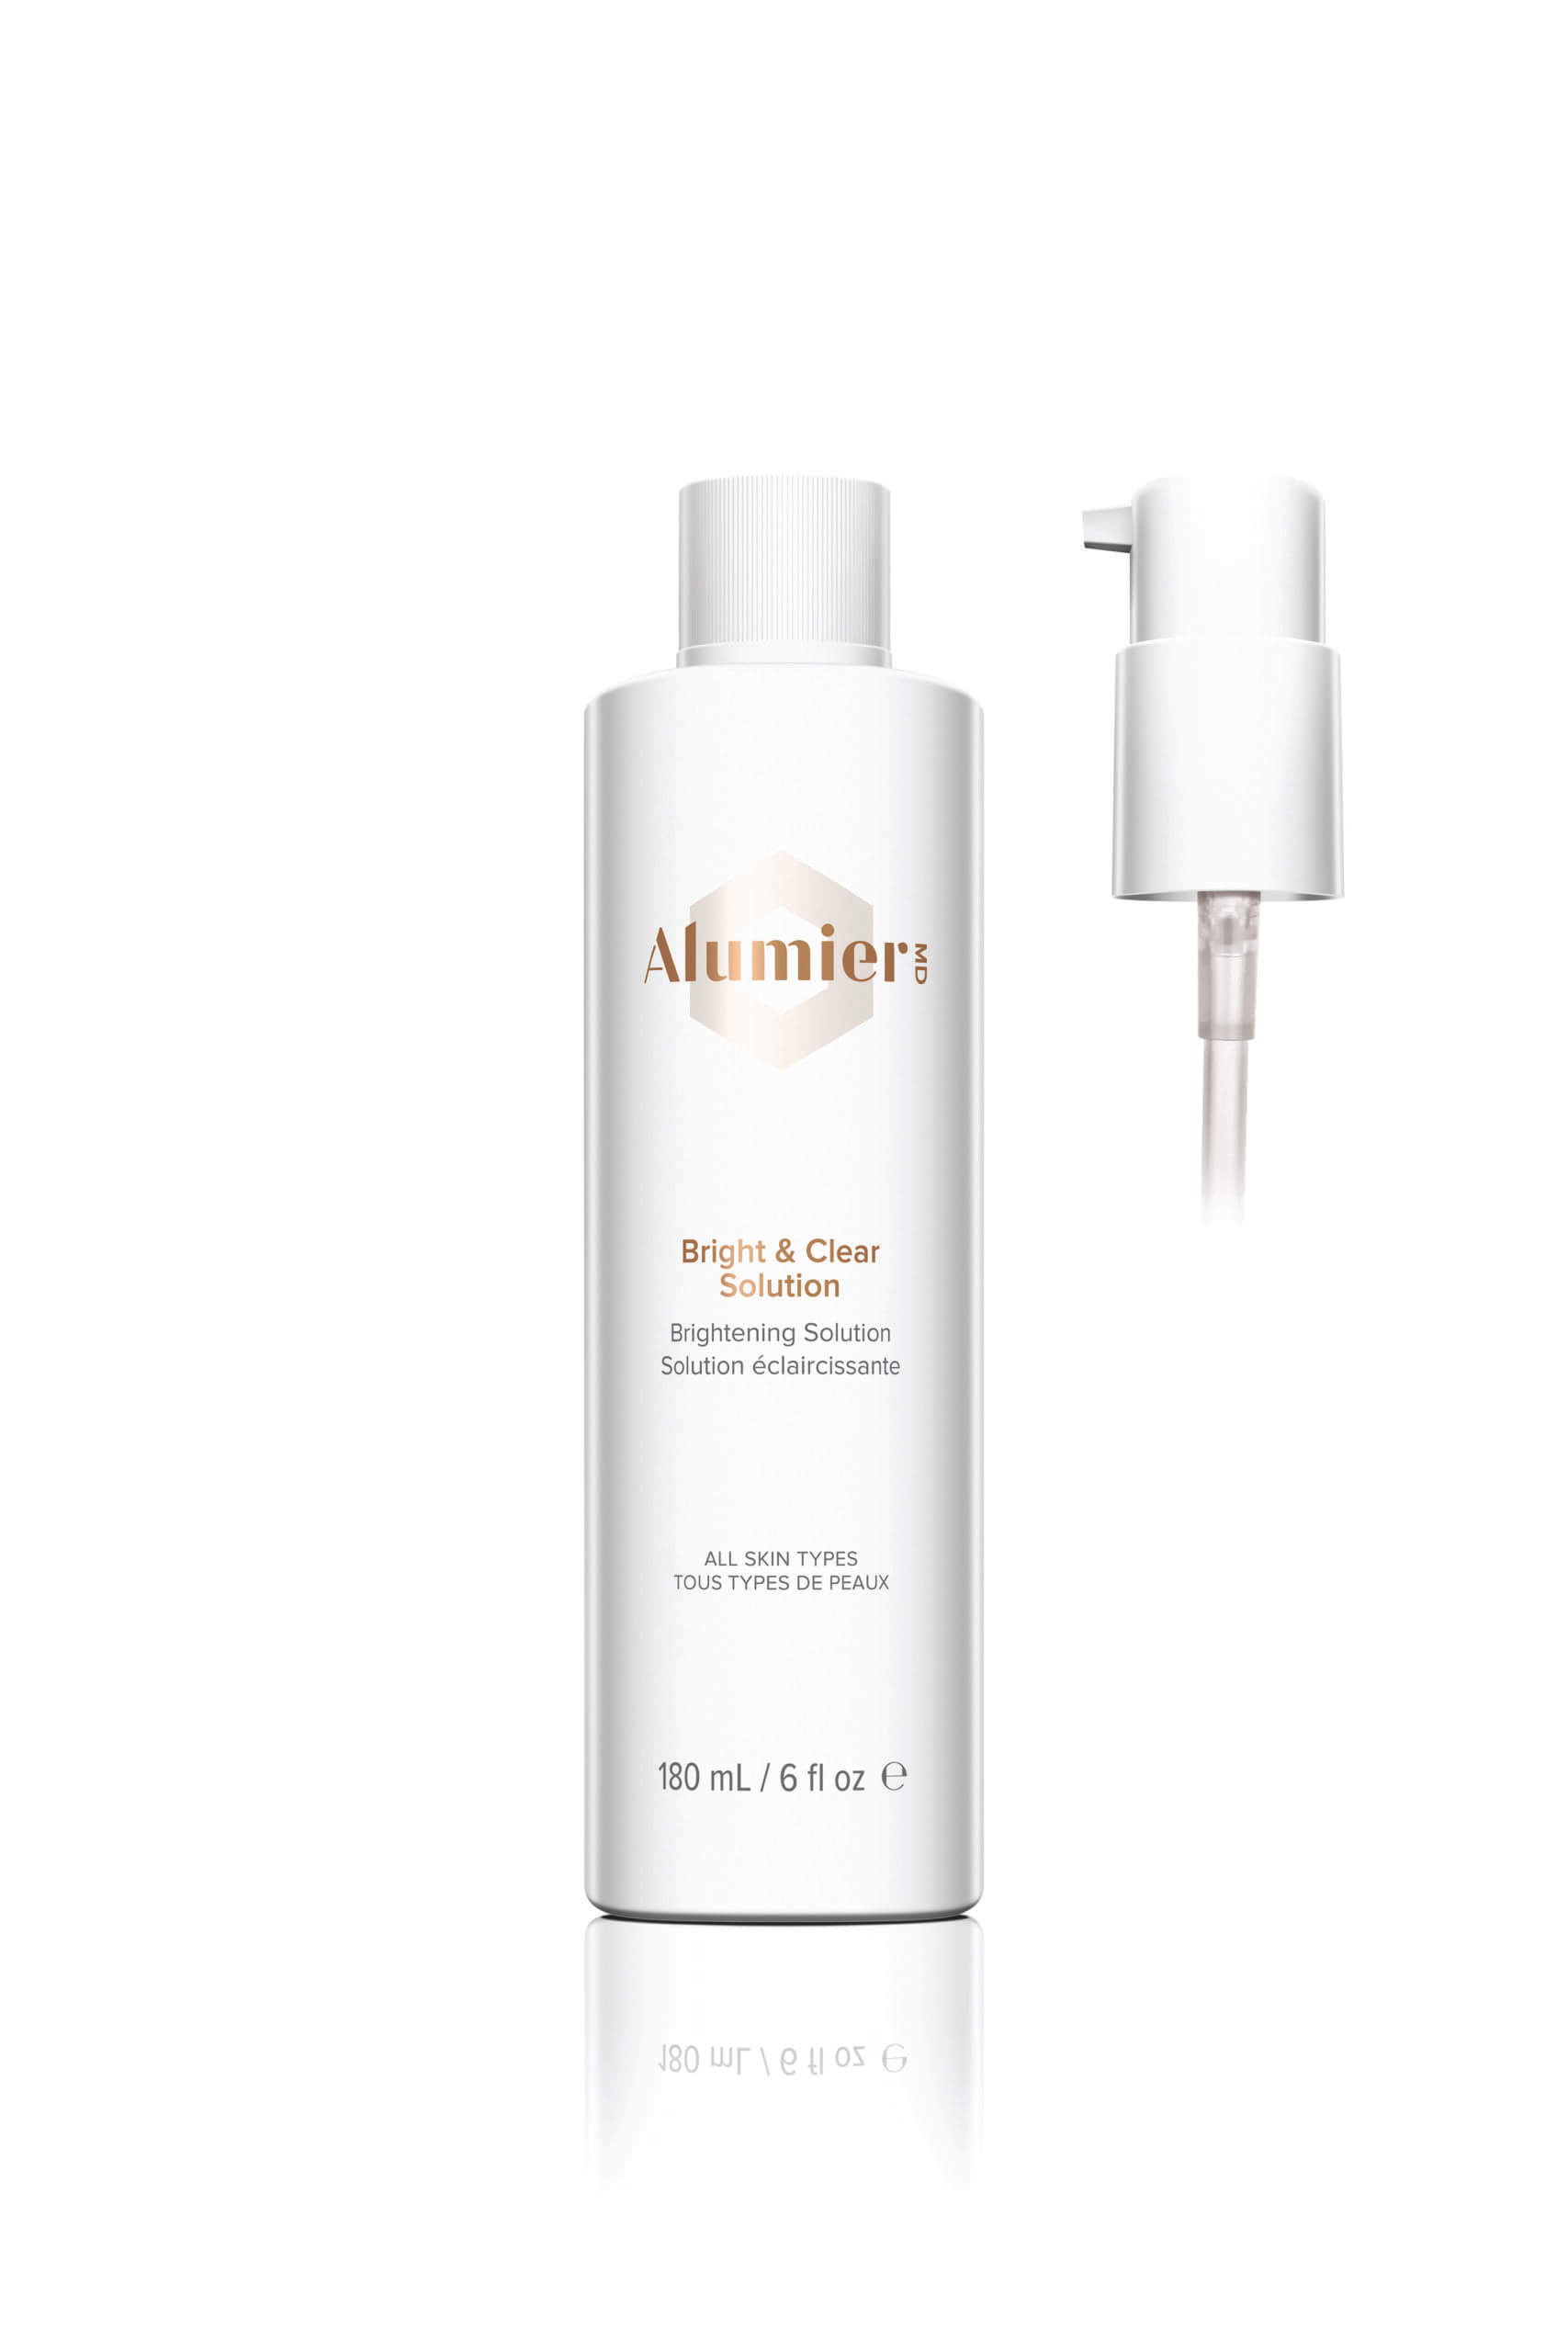 AlumierMD Bright & Clear Solution